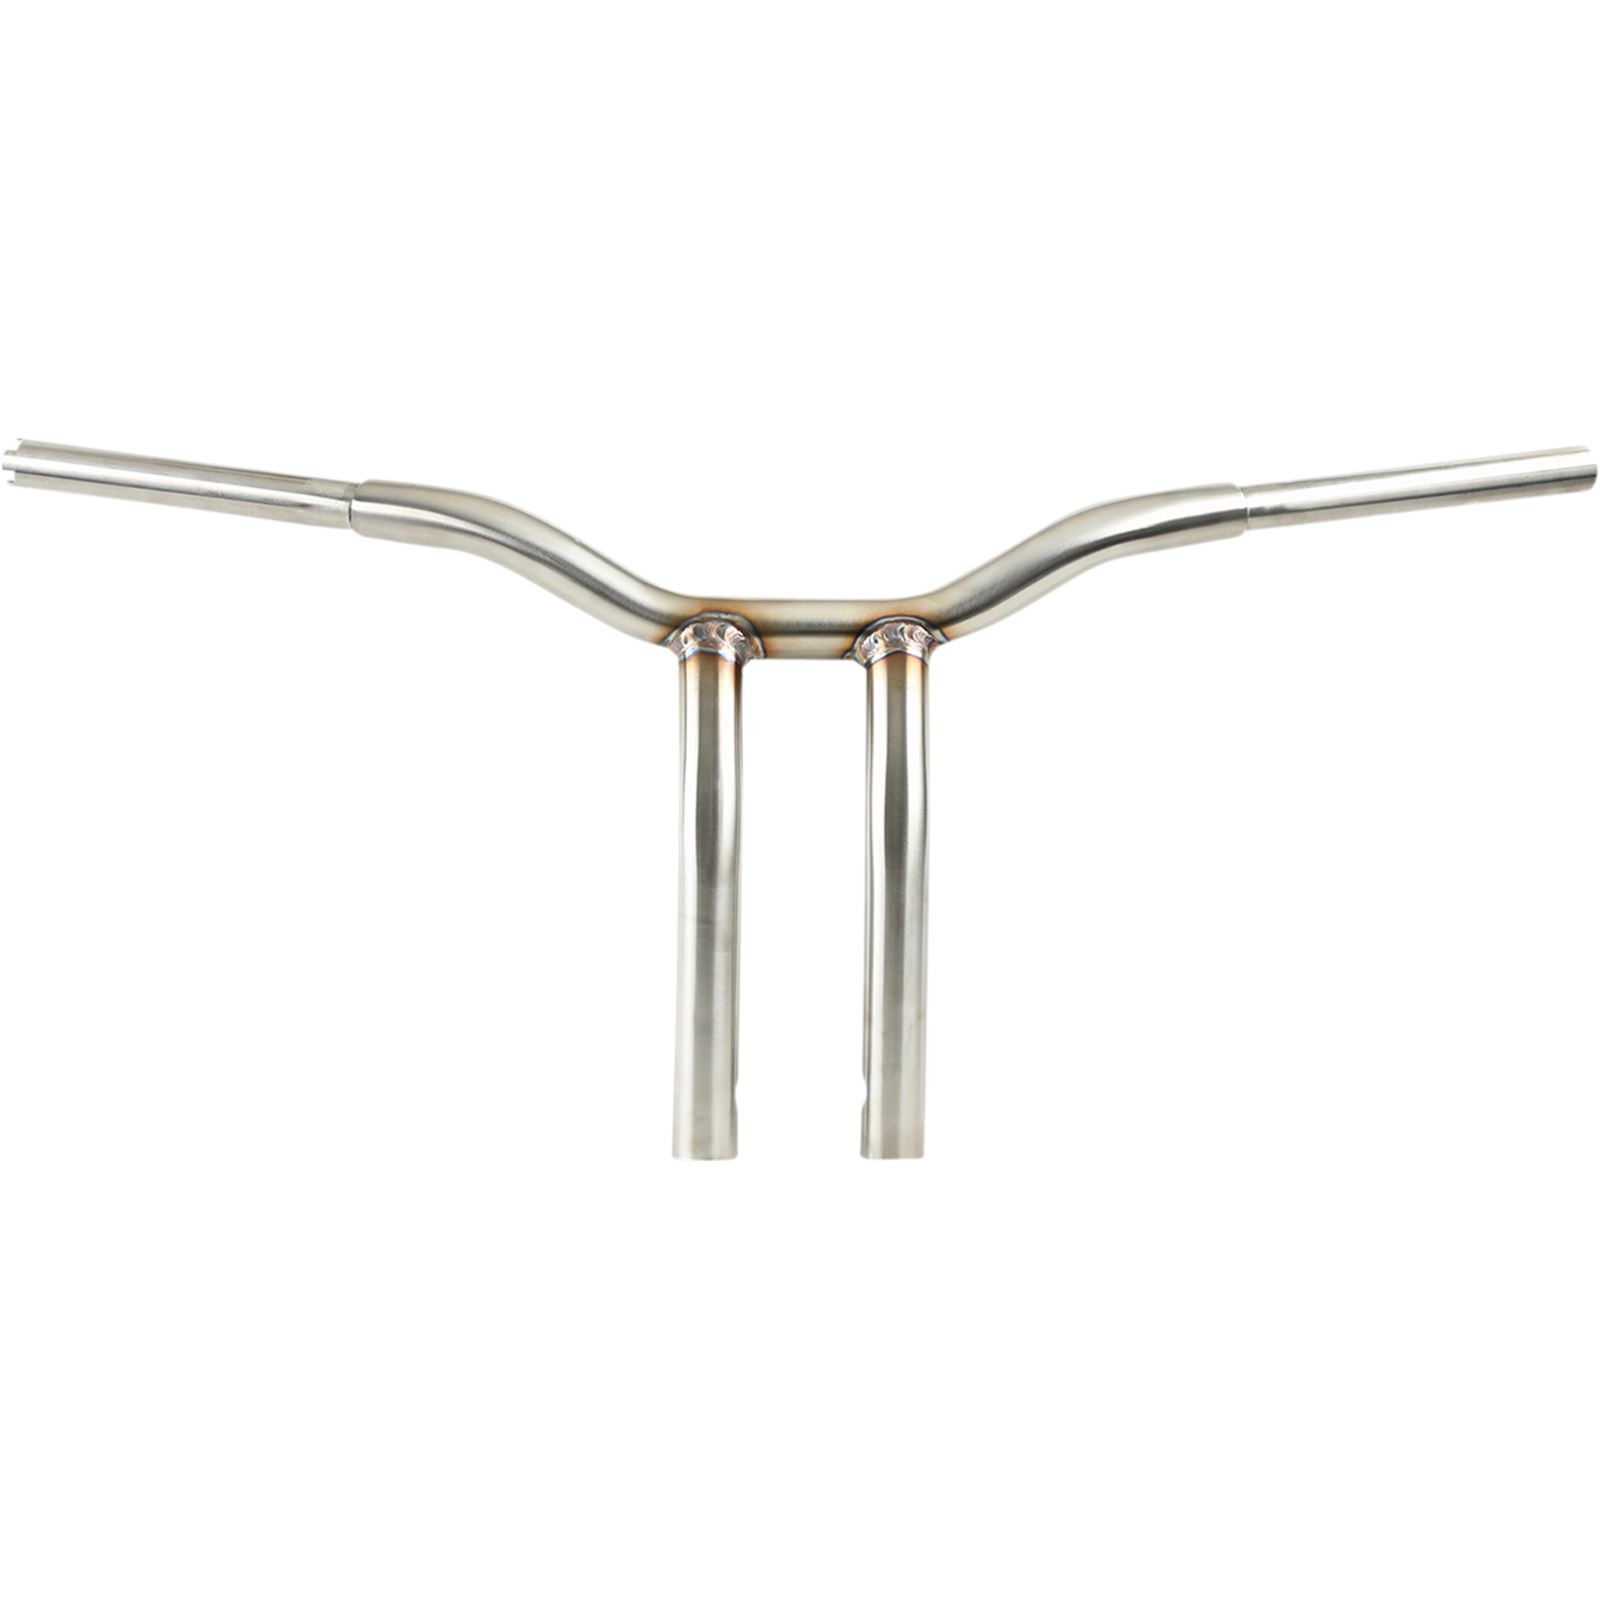 LA Choppers Handlebar - Kage Fighter - One Piece - Bent - 12" - Stainless Steel